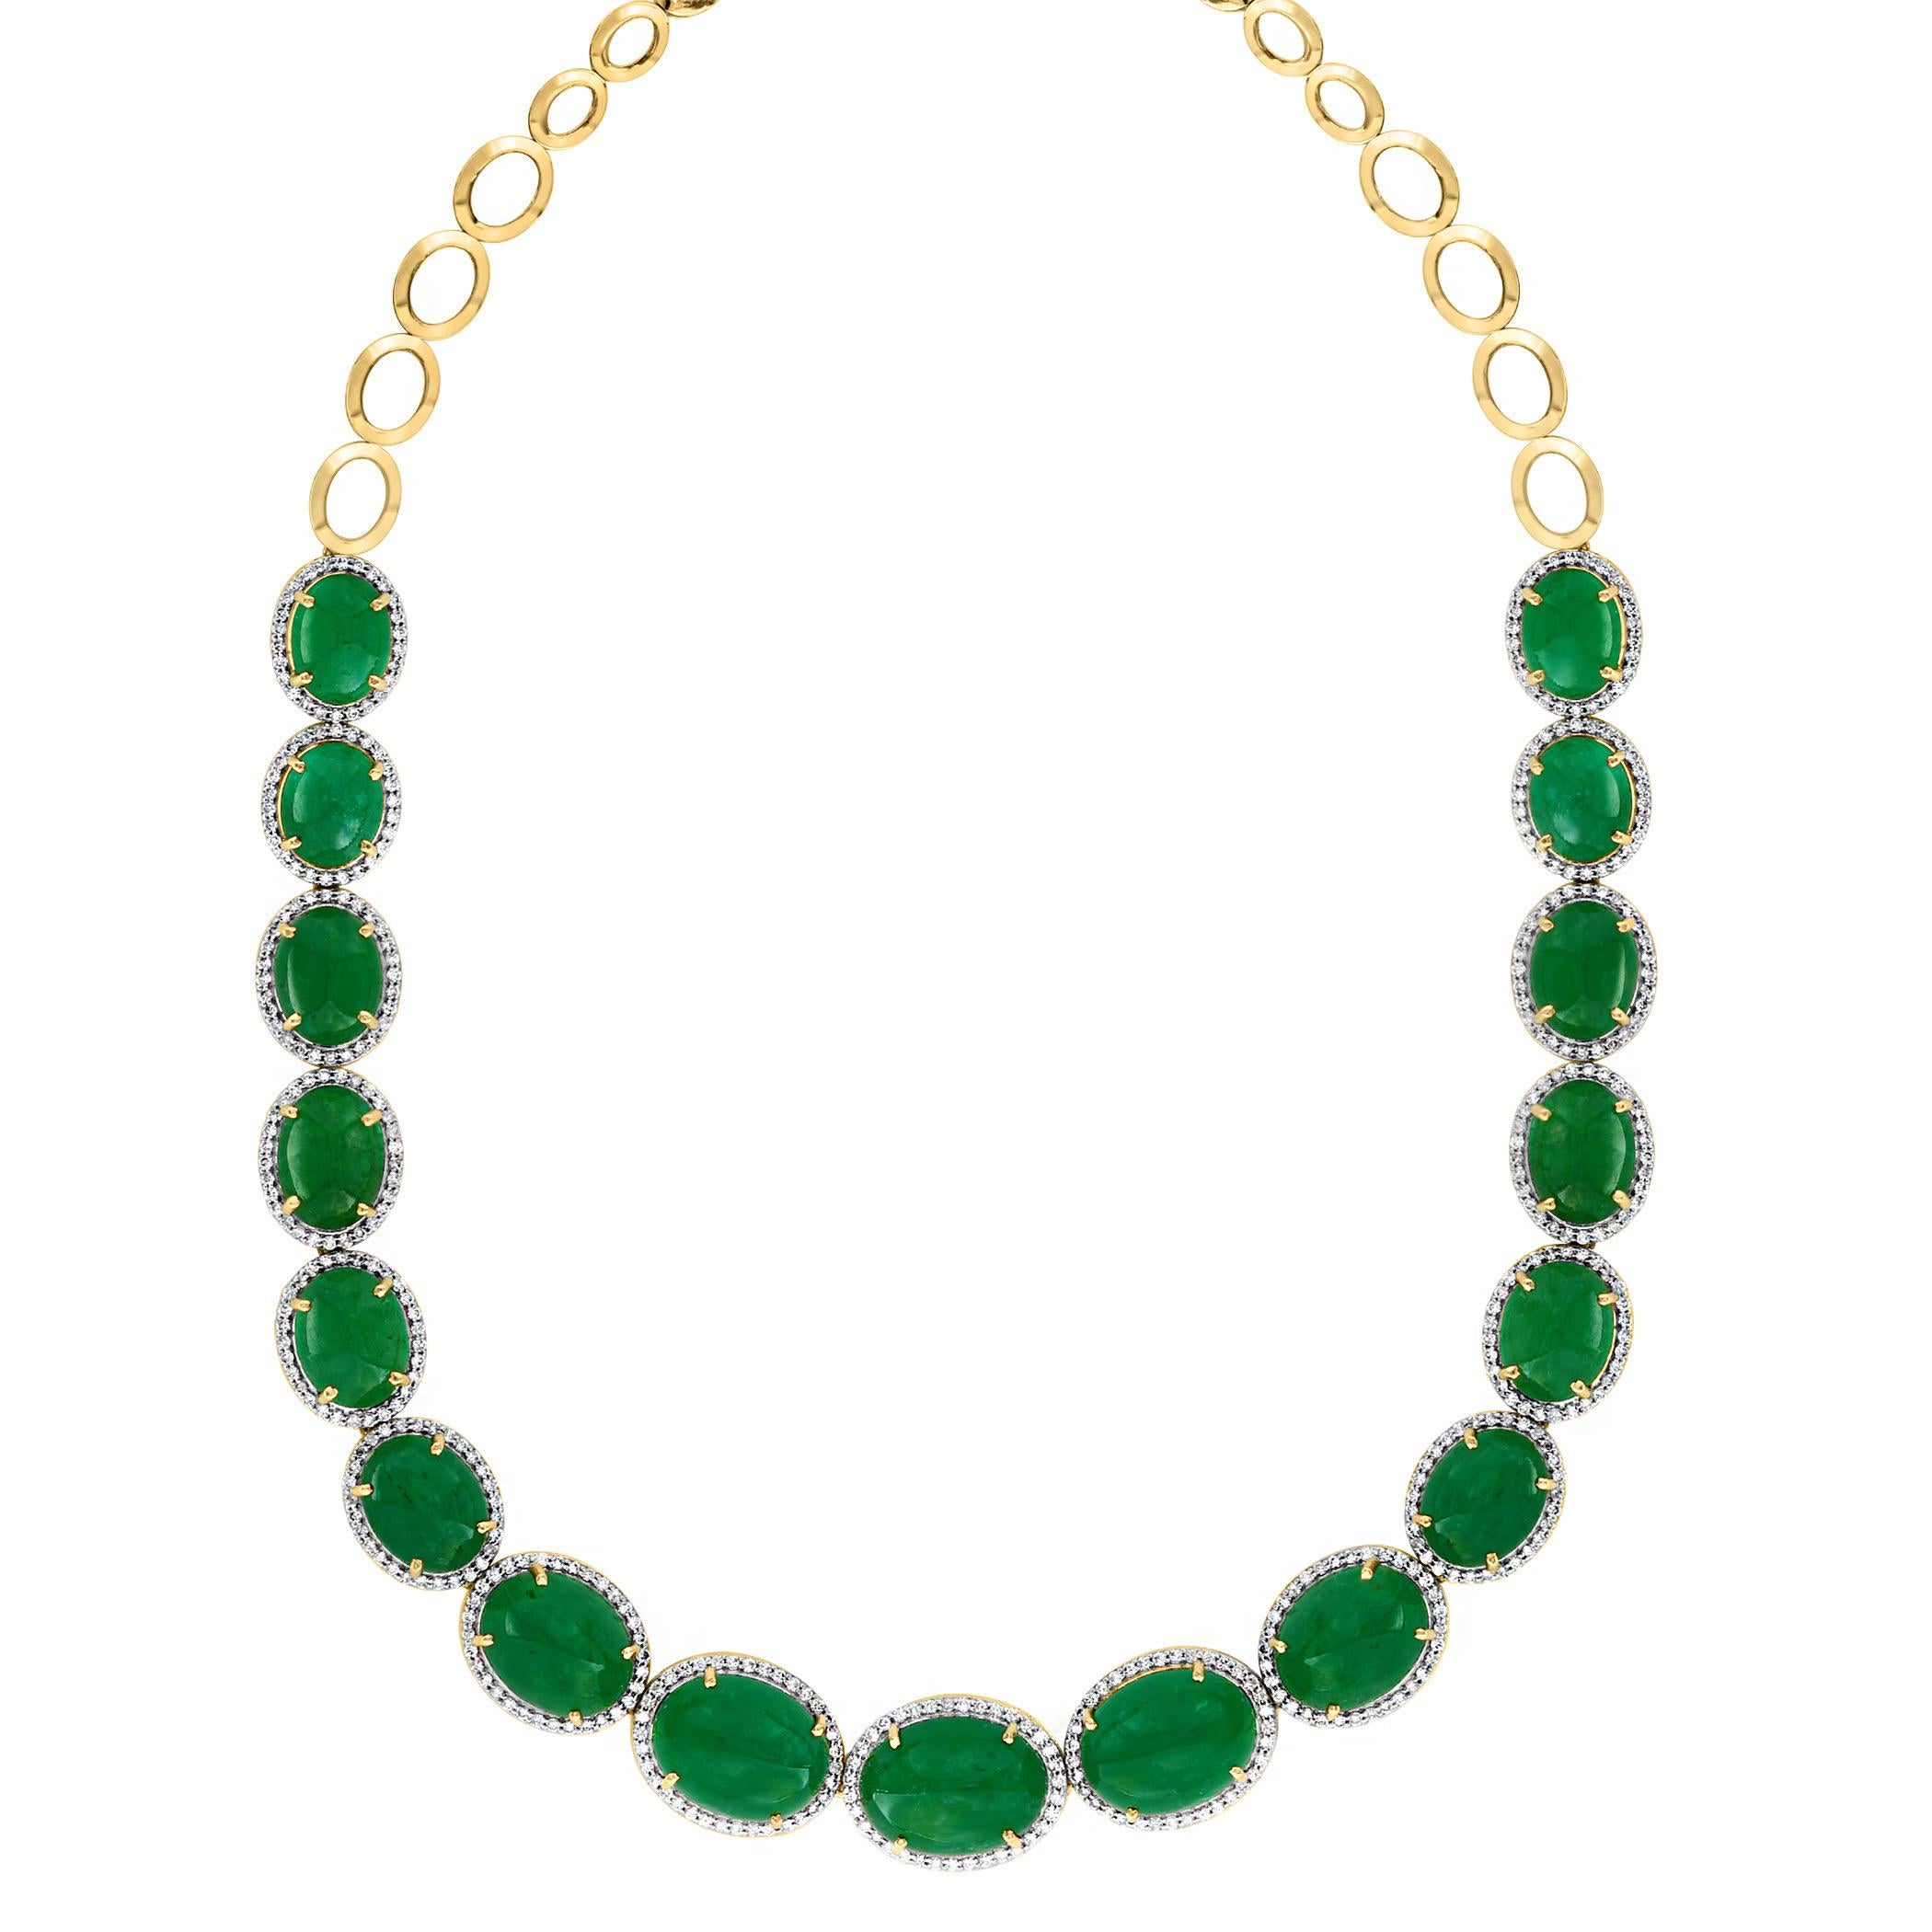 110 Ct Oval Natural Cabochon Emerald & Diamond Necklace, Earring Suite 14 K Gold In Excellent Condition For Sale In New York, NY